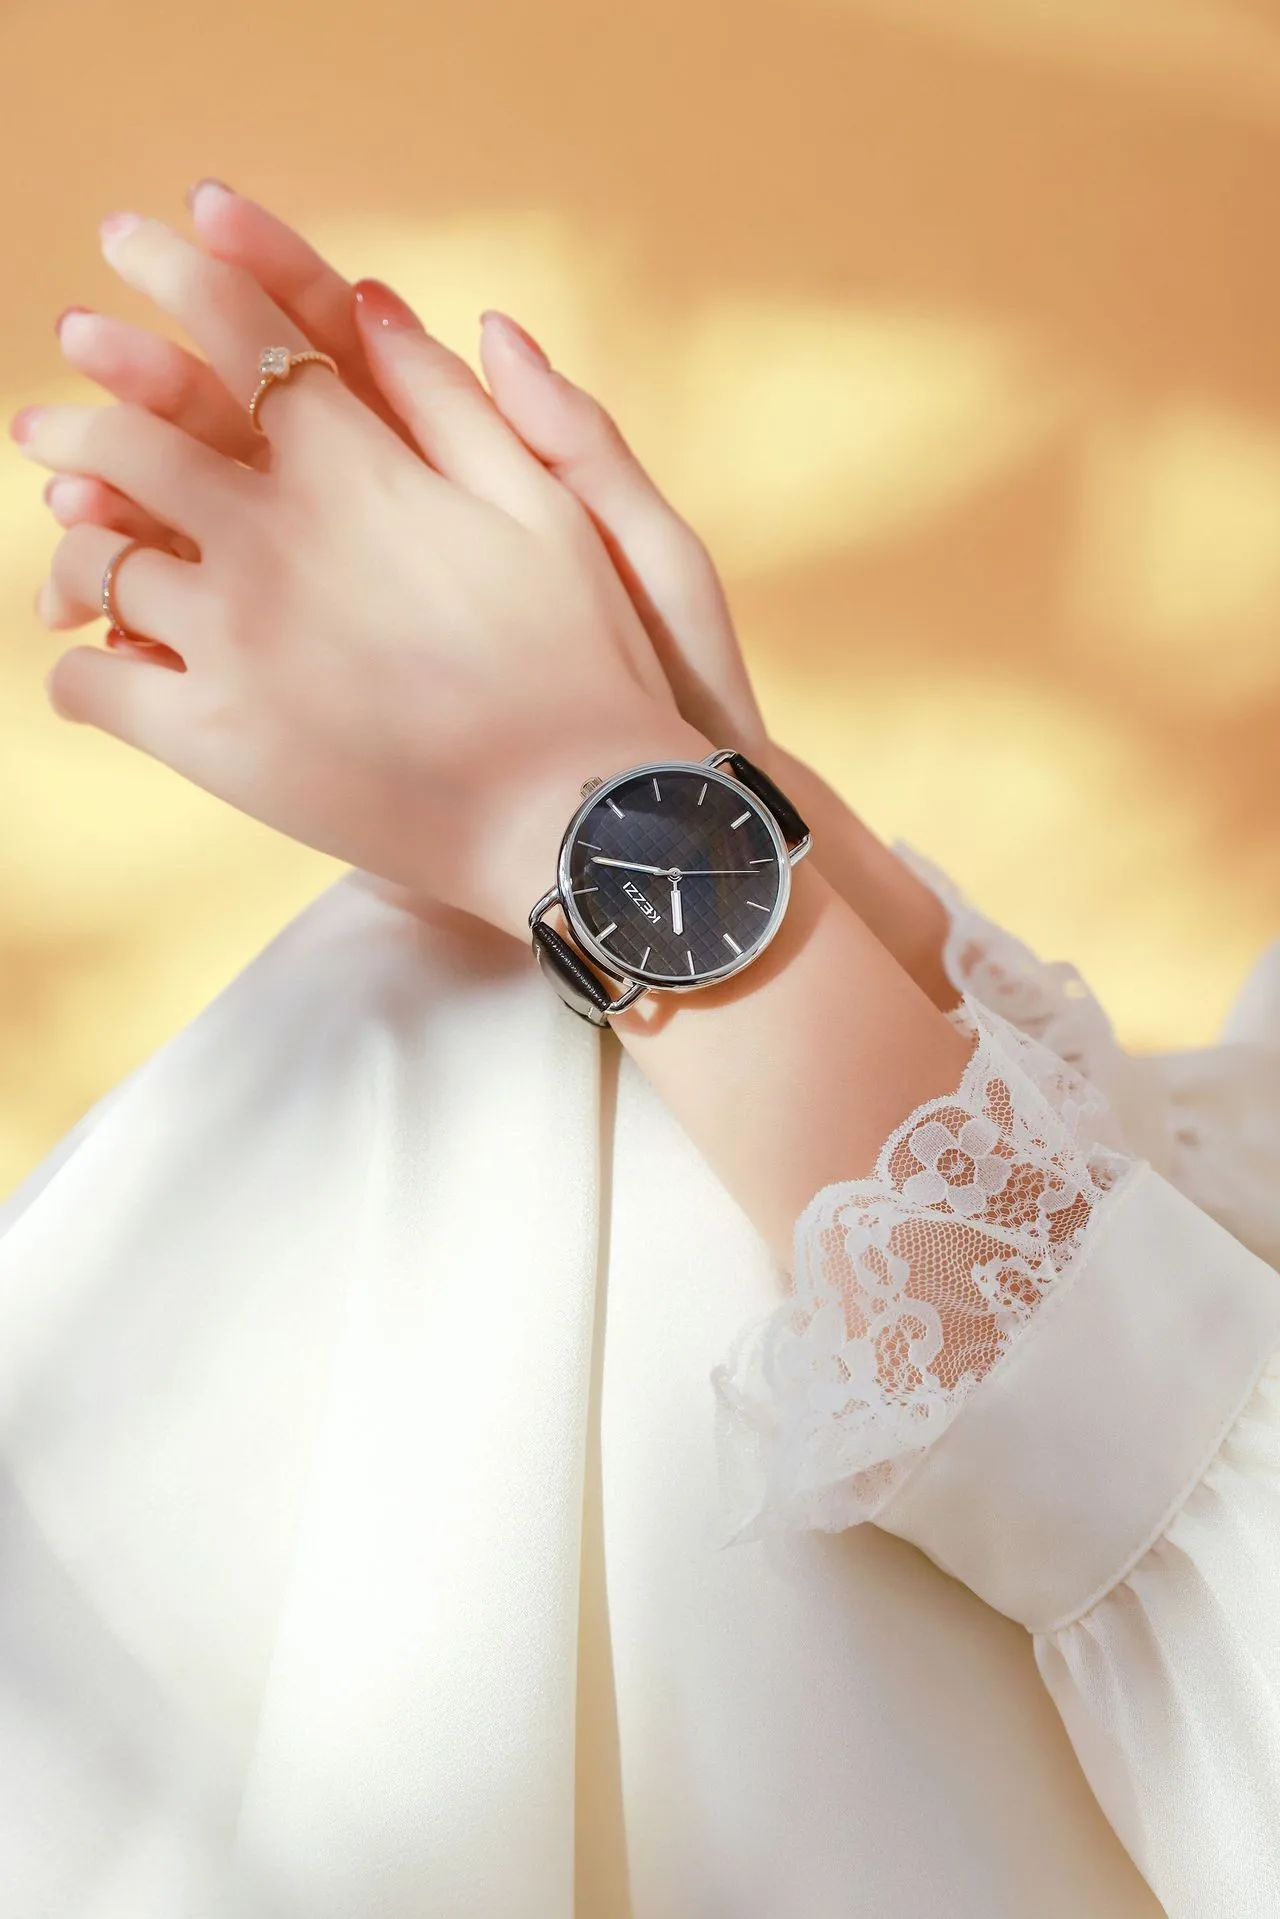 The same fashionable, cool and trendy women's watch made by Netcom is a simple quartz watch for senior high school students enlarge